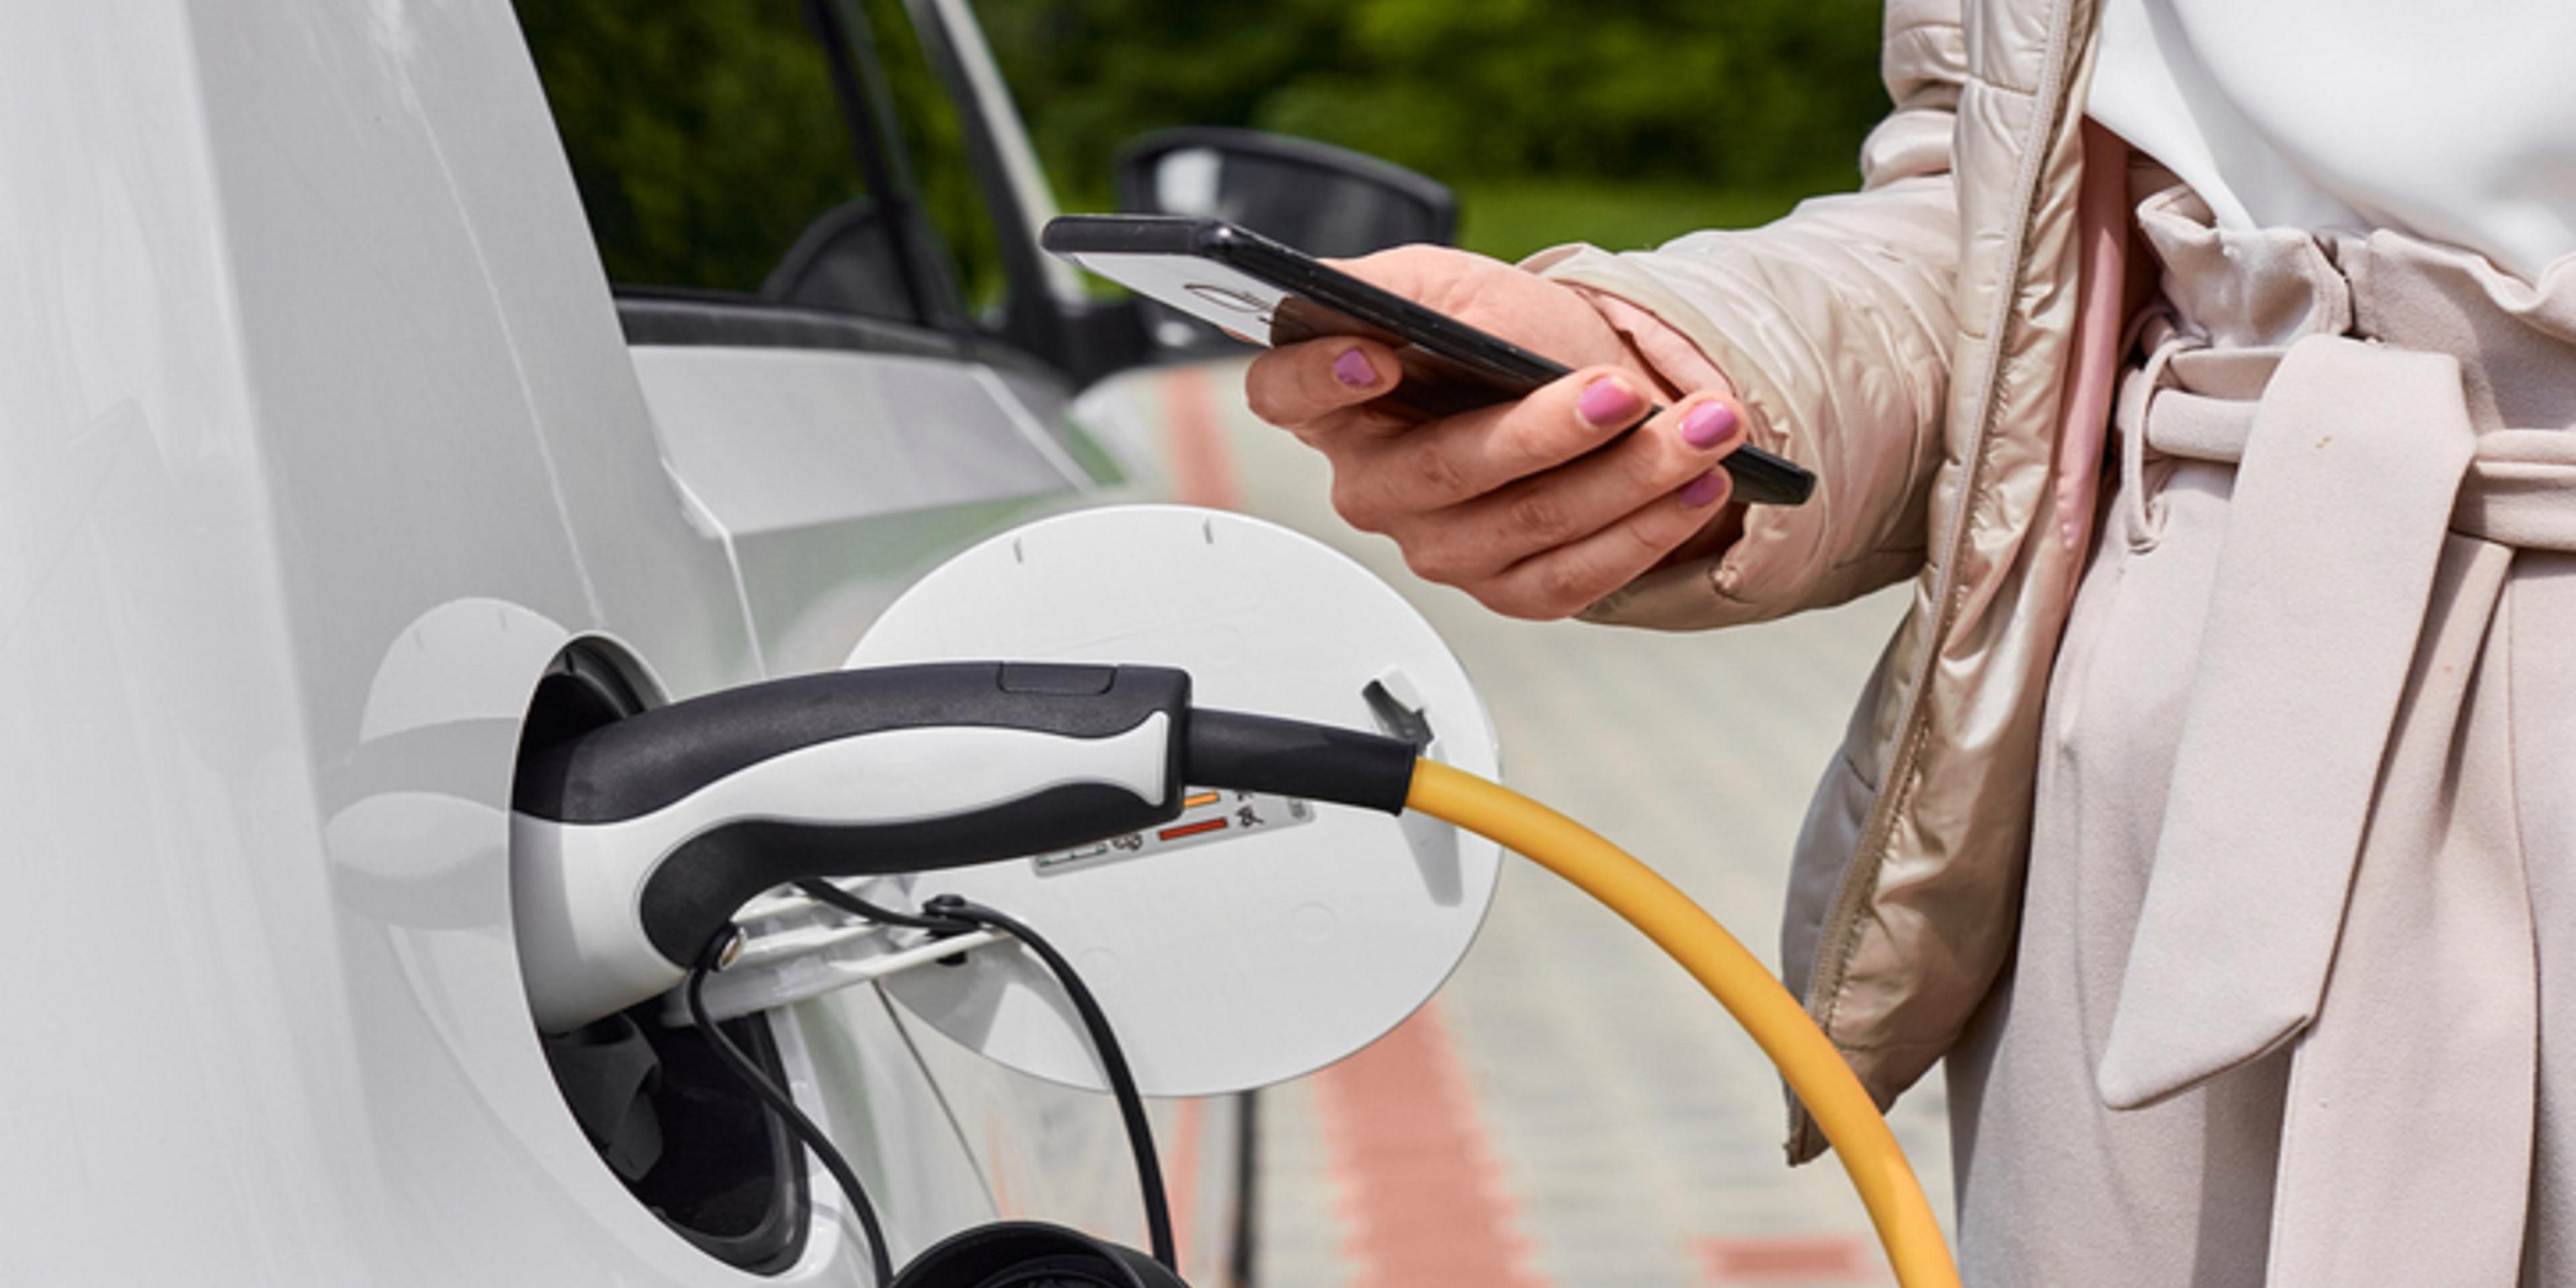 If you drive an electric vehicle, visit one of our convenient electronic charging stations during your stay. Charge is $0.35 per kilowatt hour. 